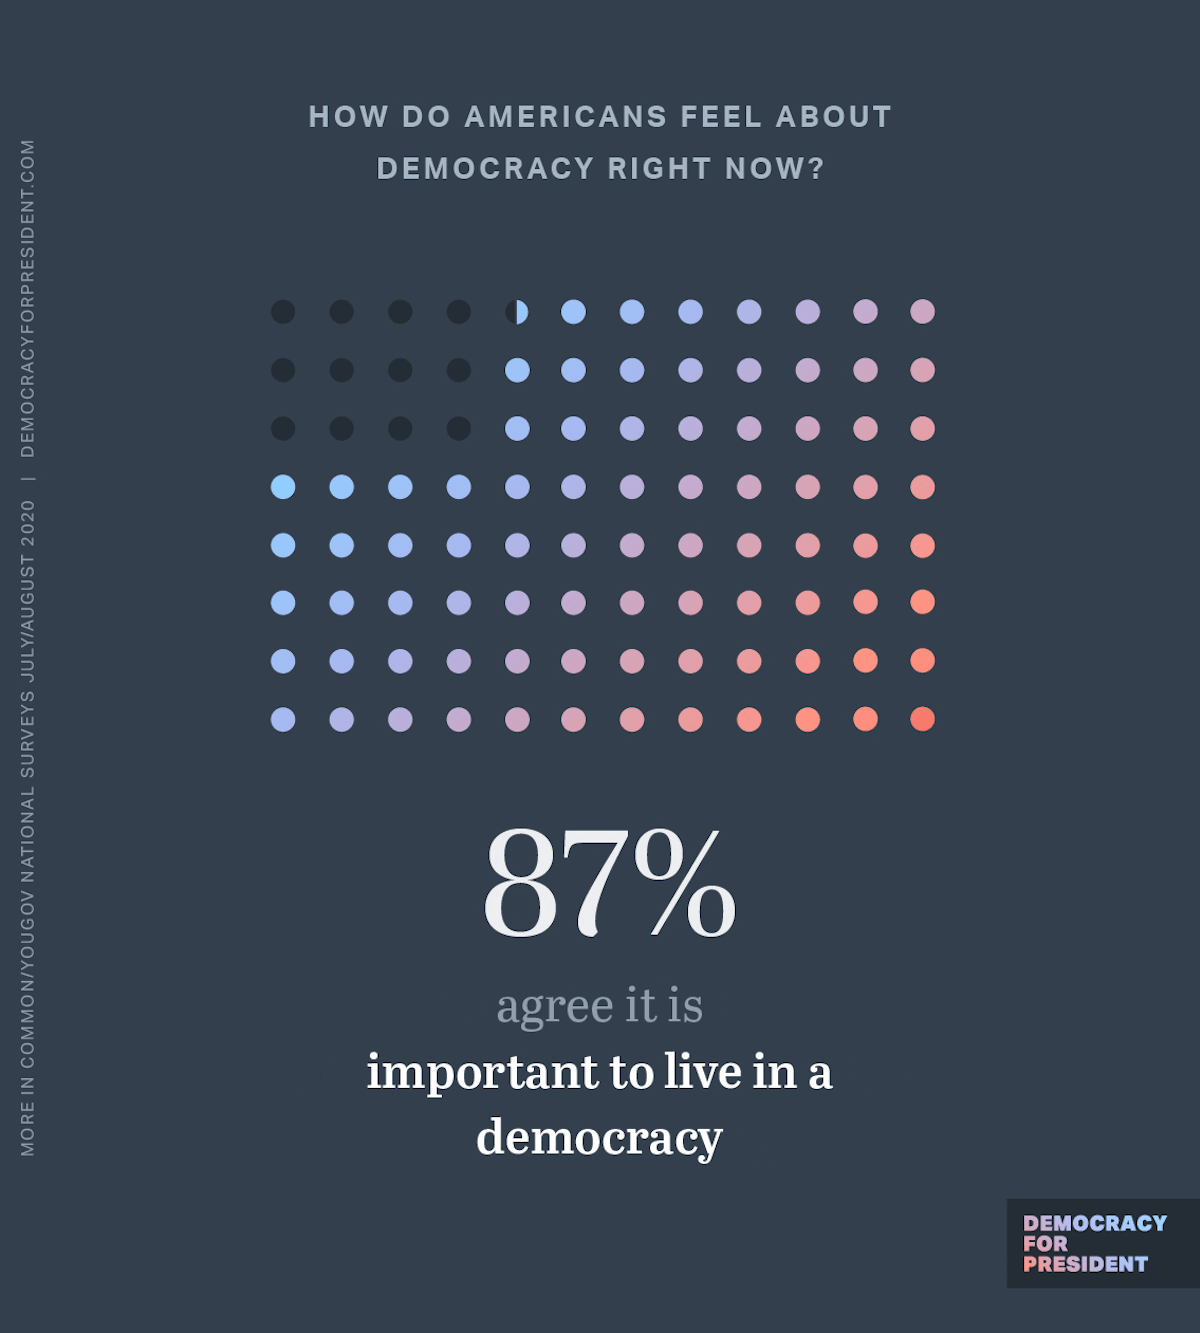 How do Americans feel about democracy right now? 87% agree it is important to live in a democracy. 45% are not satisfied with the way democracy works in America today.